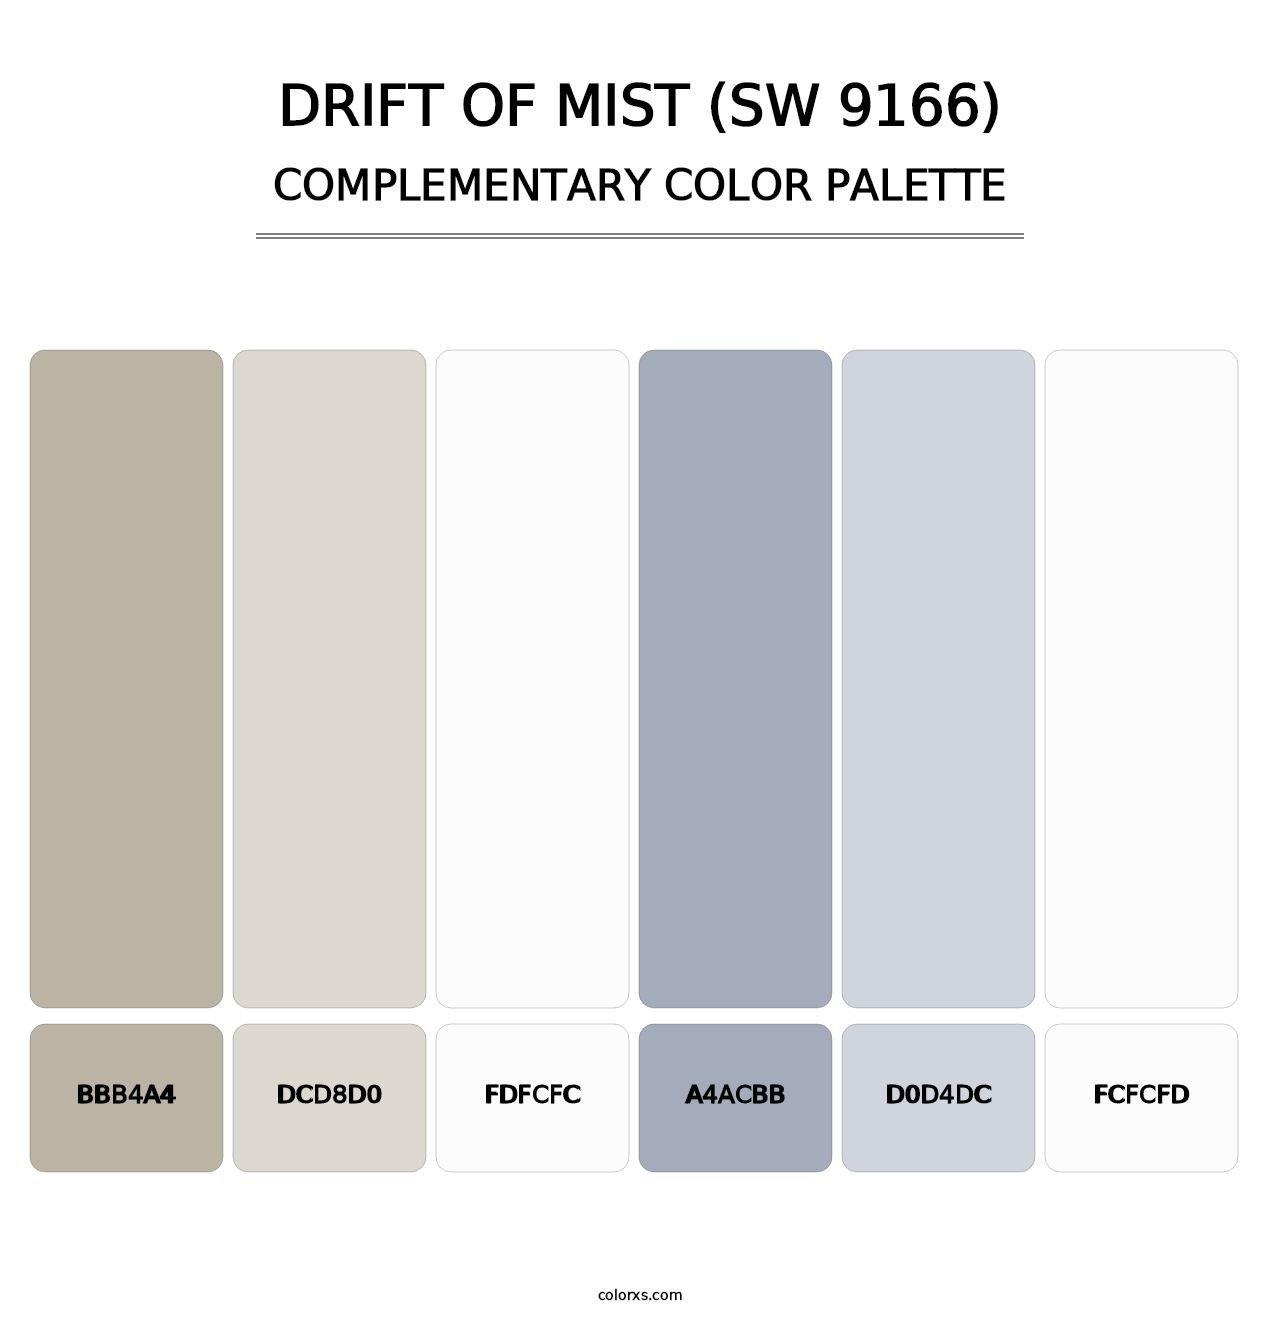 Drift of Mist (SW 9166) - Complementary Color Palette